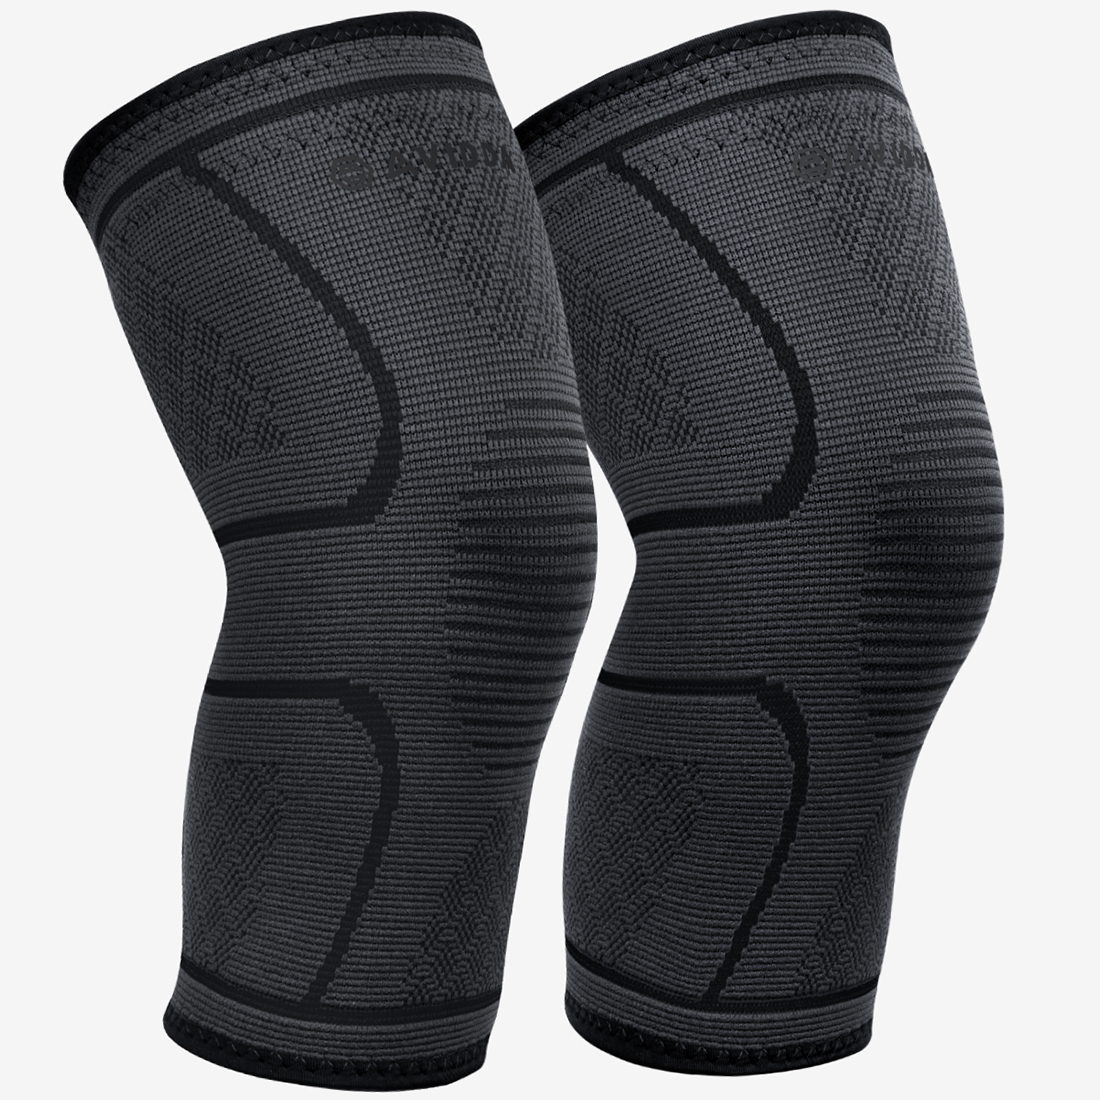 AVIDDA Knee Support Brace 2 Pack - Compression Knee Sleeves for Arthritis, Joint Pain, Ligament Injury, Meniscus Tear, ACL, MCL, Tendonitis, Running, Squats, Sports